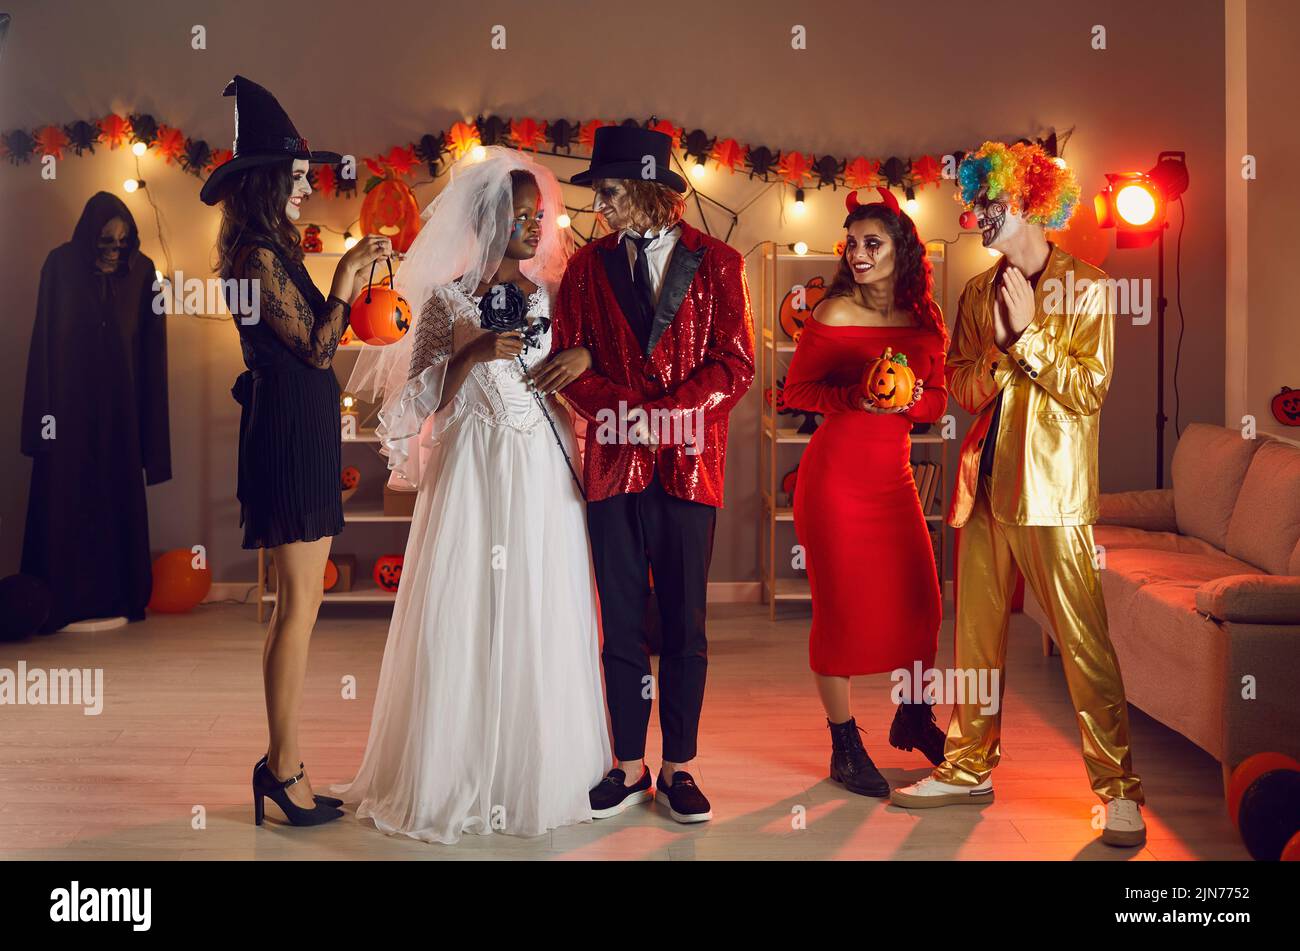 Man and woman in love dressed as dead wedding couple at Halloween party with friends Stock Photo